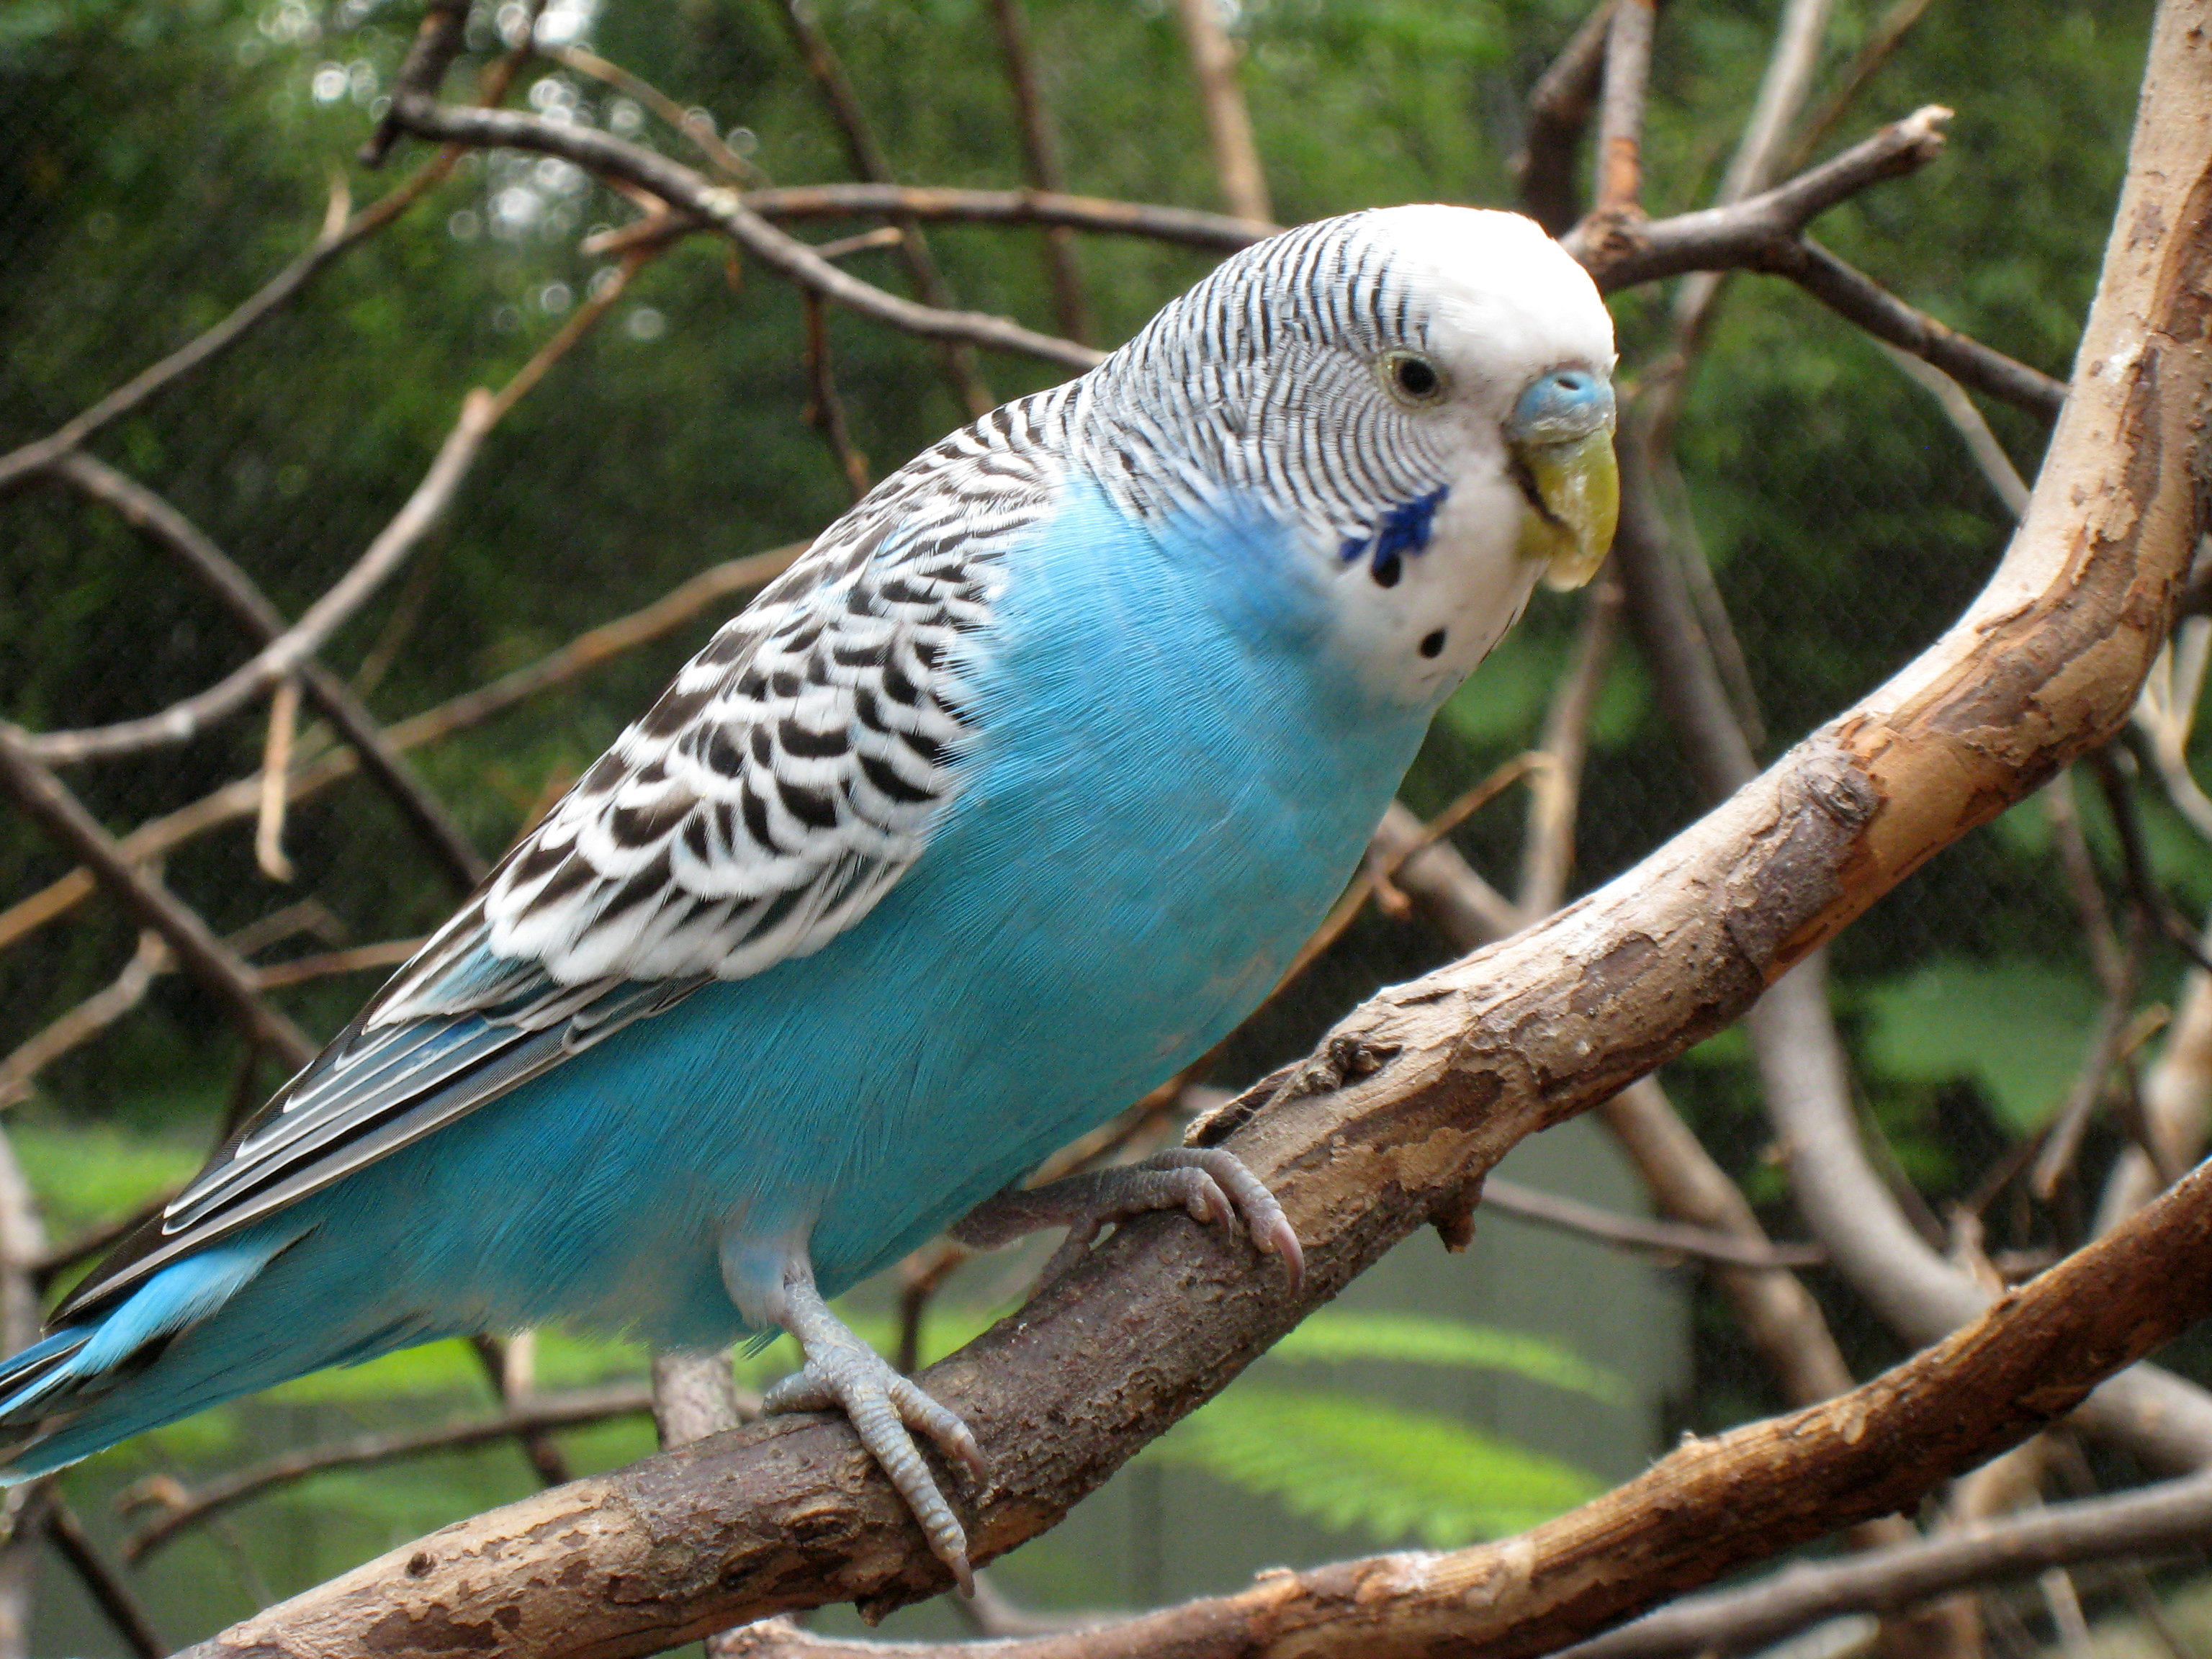 Budgie HD Wallpaper Background Image